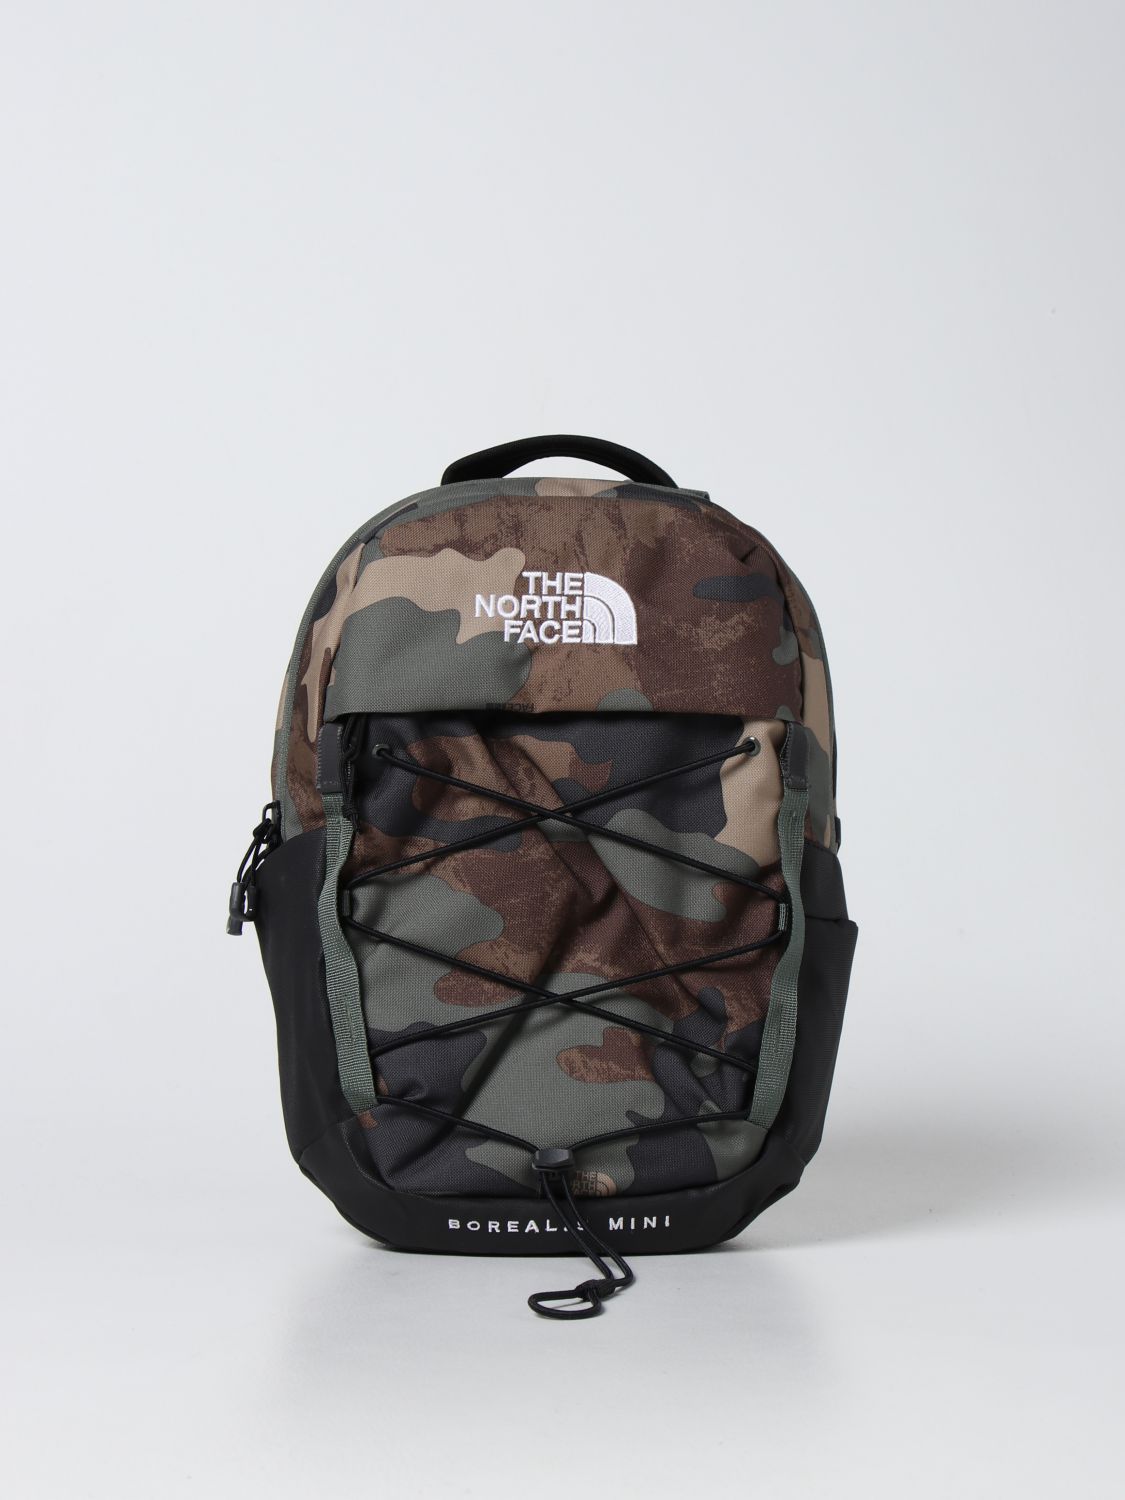 Sac à dos The North Face: Sac à dos homme The North Face vert militaire 1